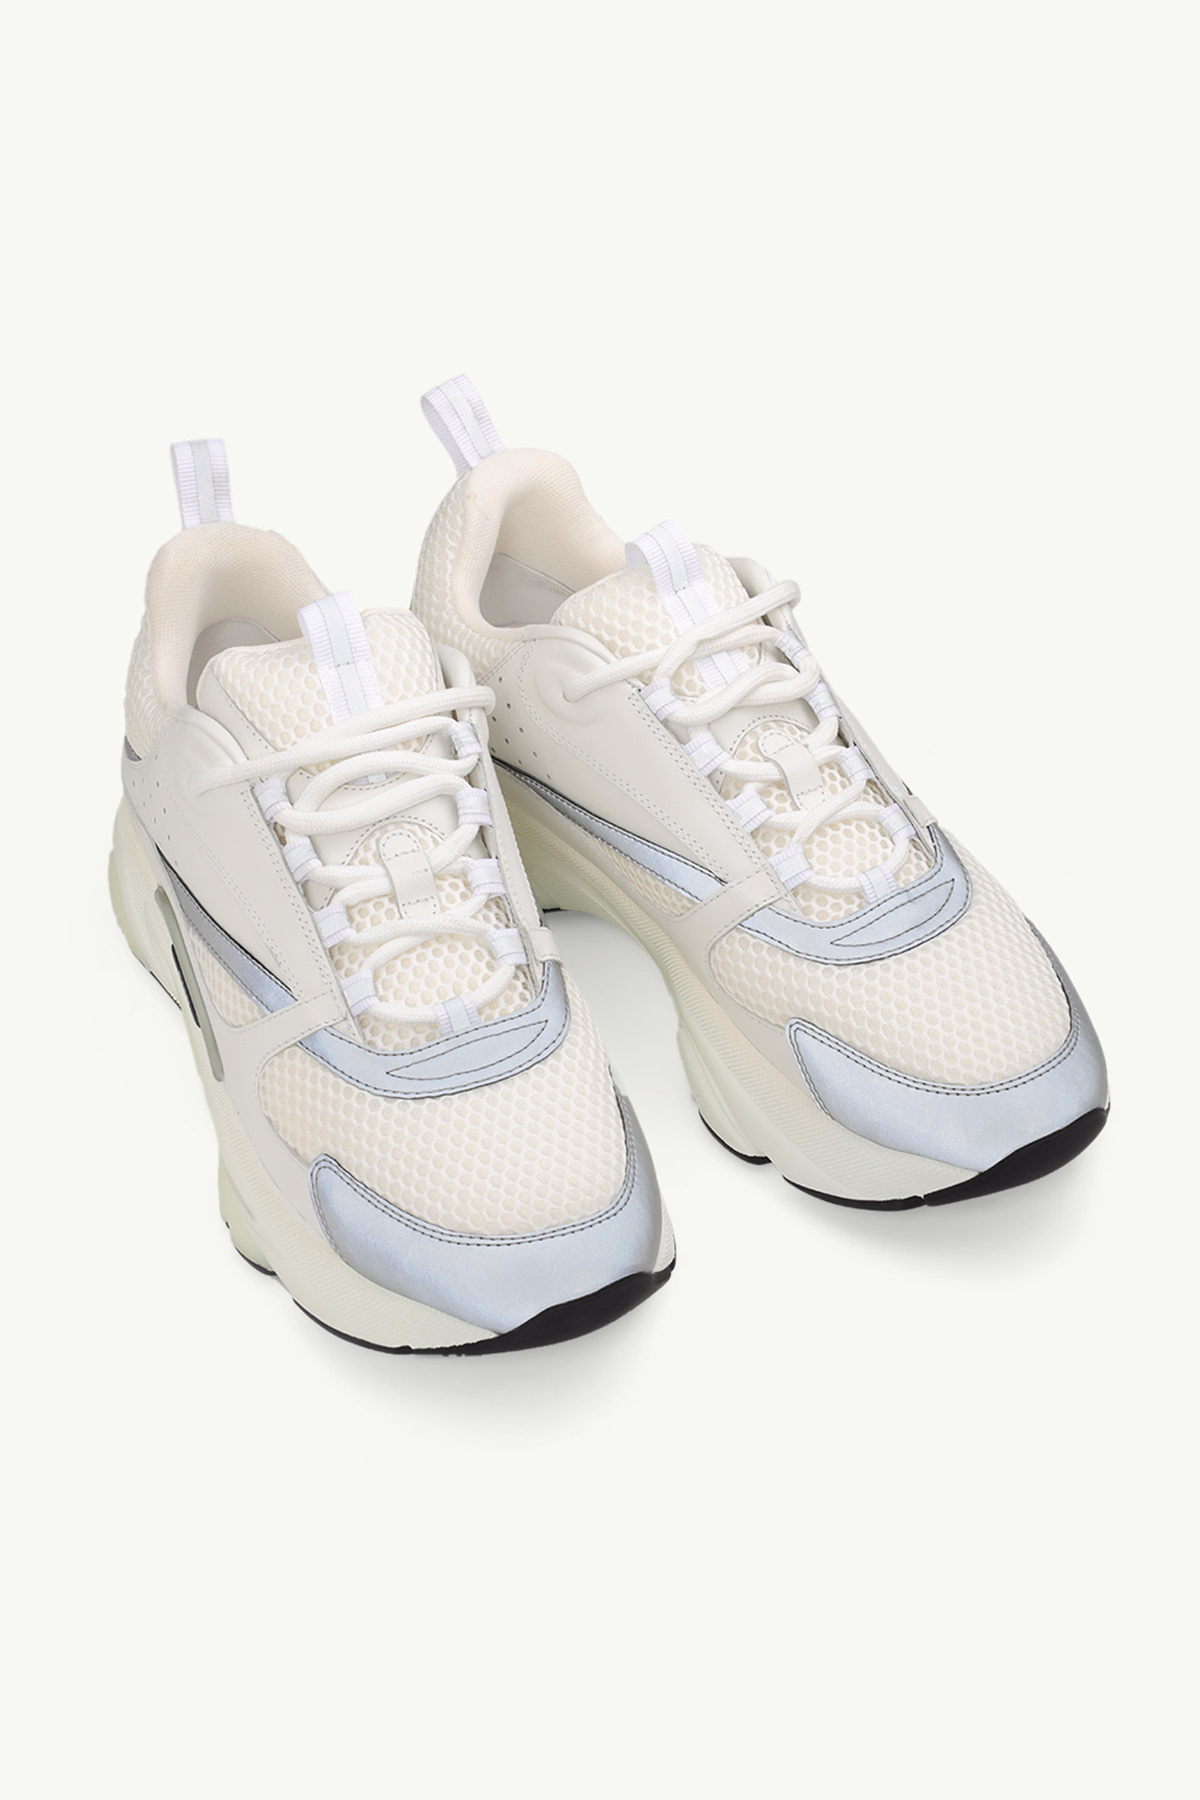 CHRISTIAN DIOR B22 Sneakers in White Technical Mesh 1